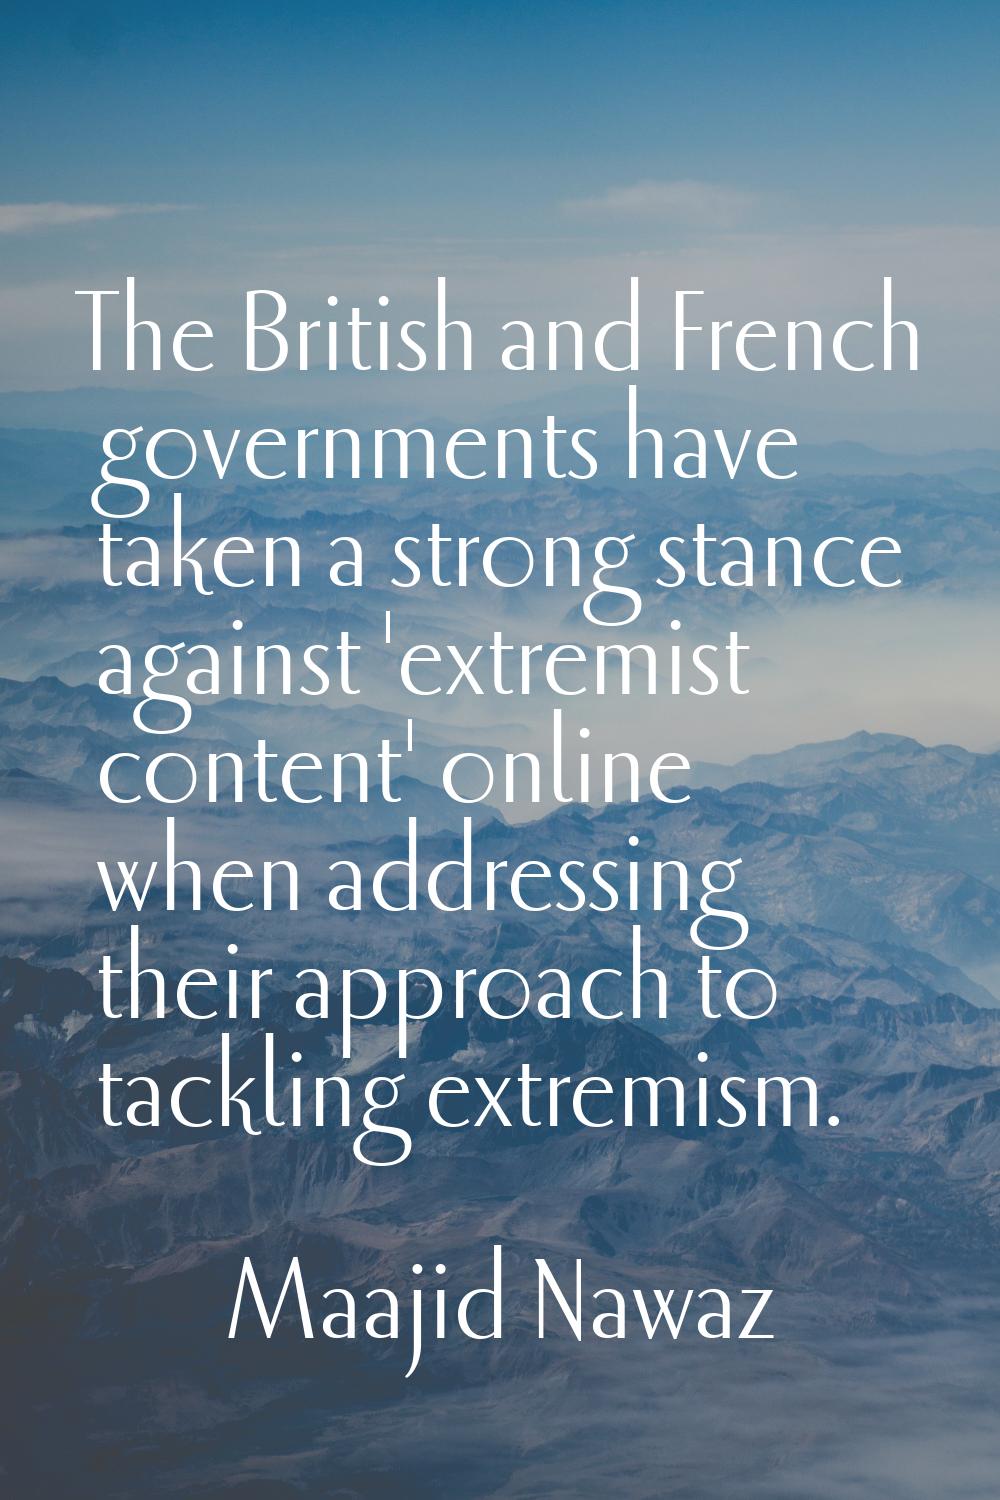 The British and French governments have taken a strong stance against 'extremist content' online wh